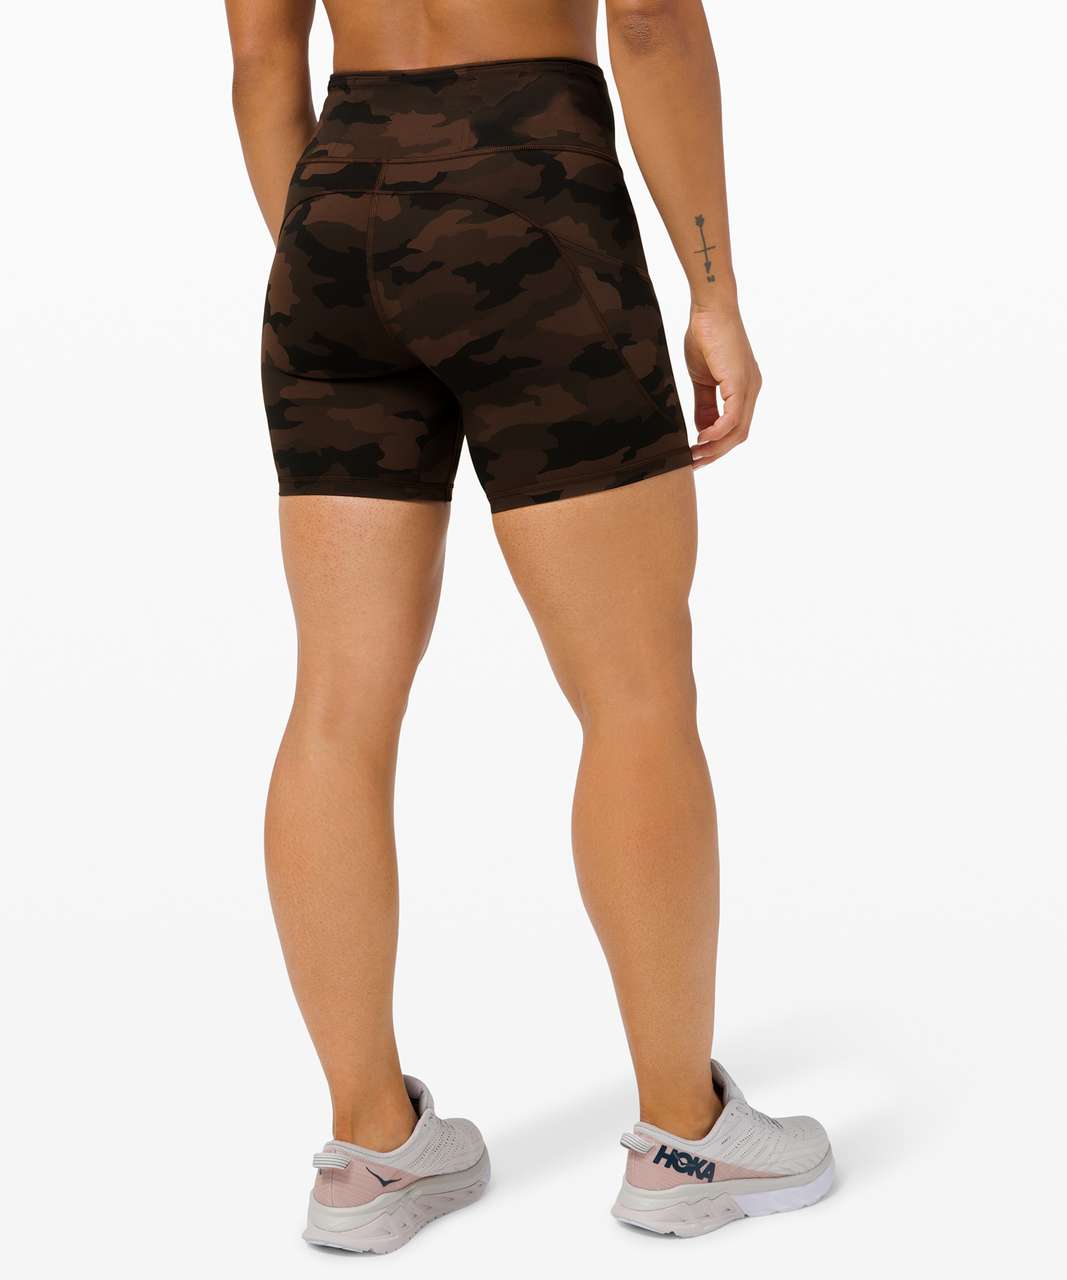 Lululemon Fast and Free Short 6" *Non-Reflective - Heritage 365 Camo Brown Earth Multi